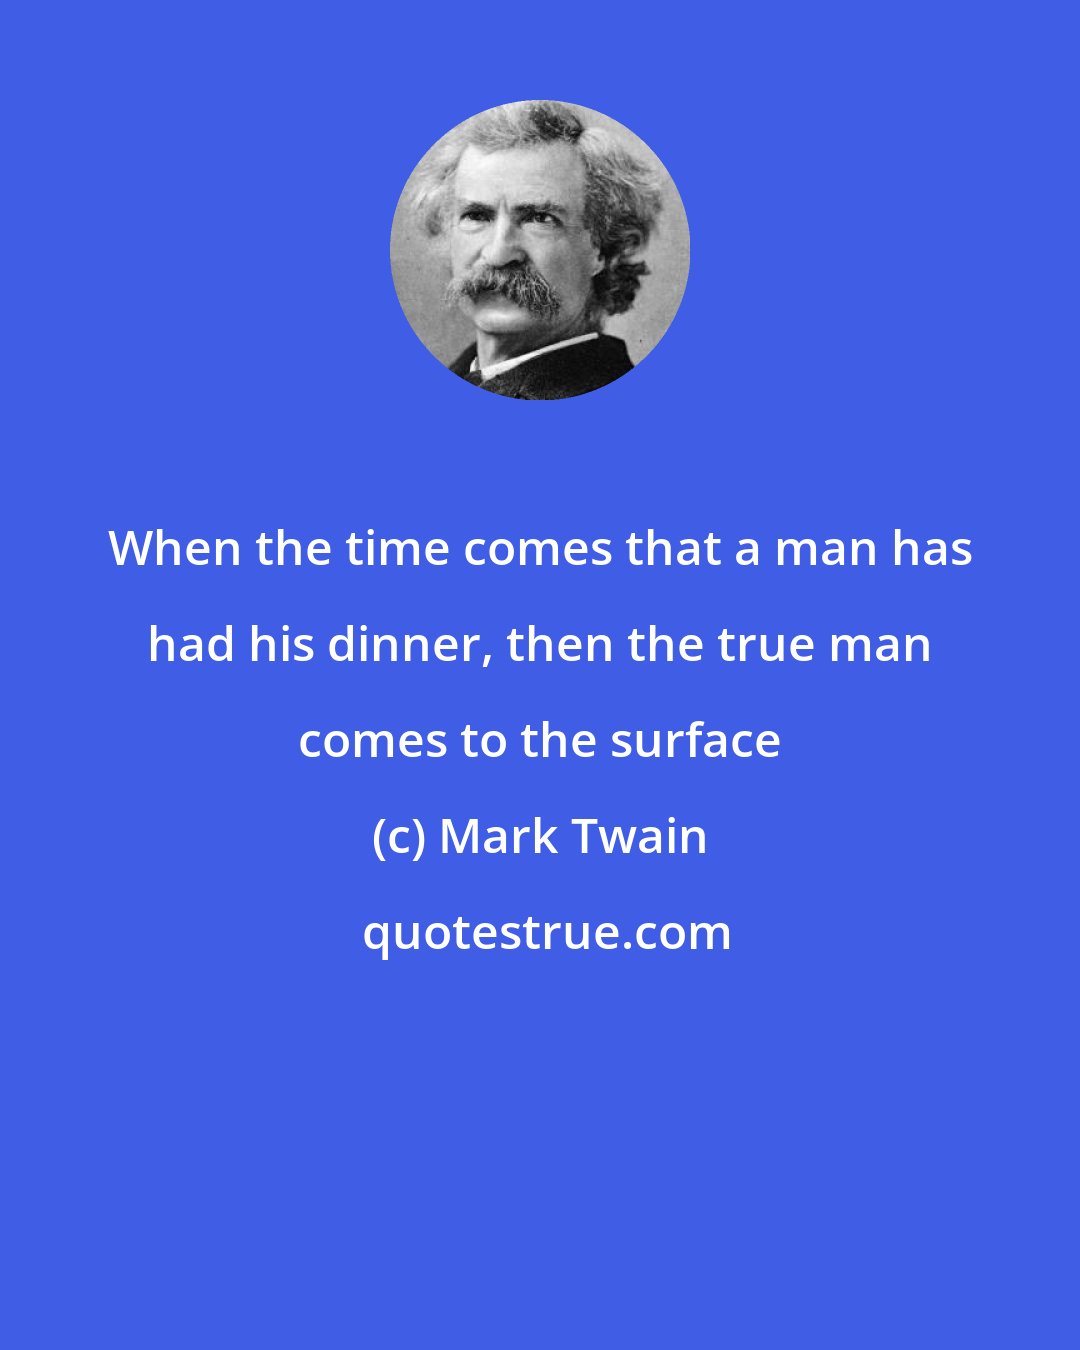 Mark Twain: When the time comes that a man has had his dinner, then the true man comes to the surface